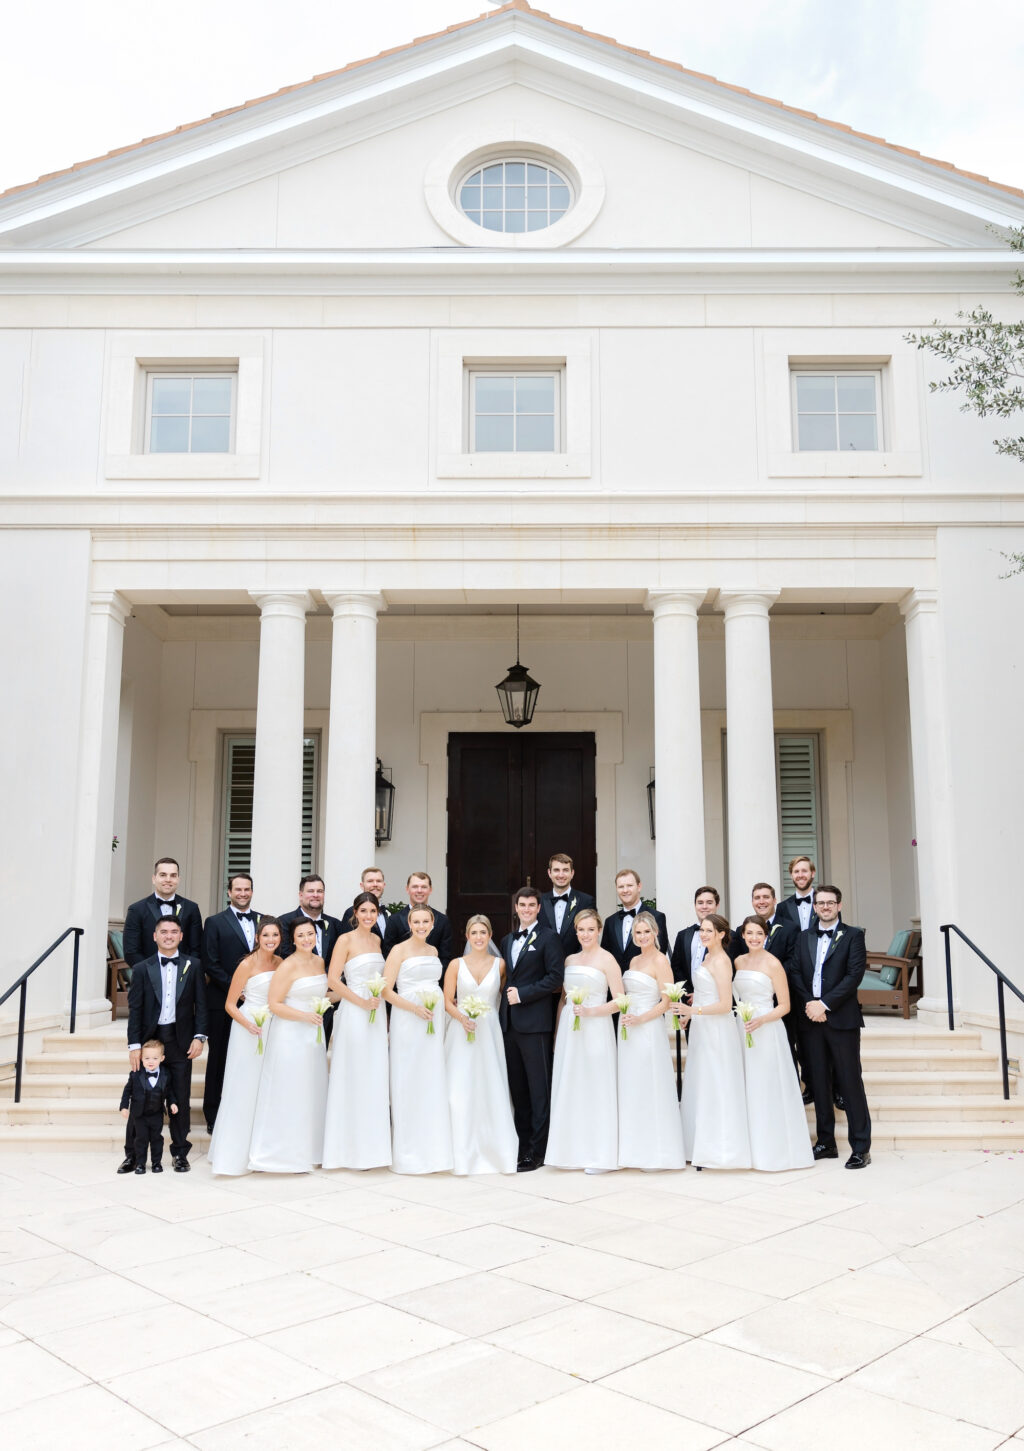 Groom and Groomsman Black Tuxedo Classic Wedding Attire Inspiration | All-White Amsale Bella Bridesmaids Strapless Dress Ideas with Classic Cala Lily Bouquets